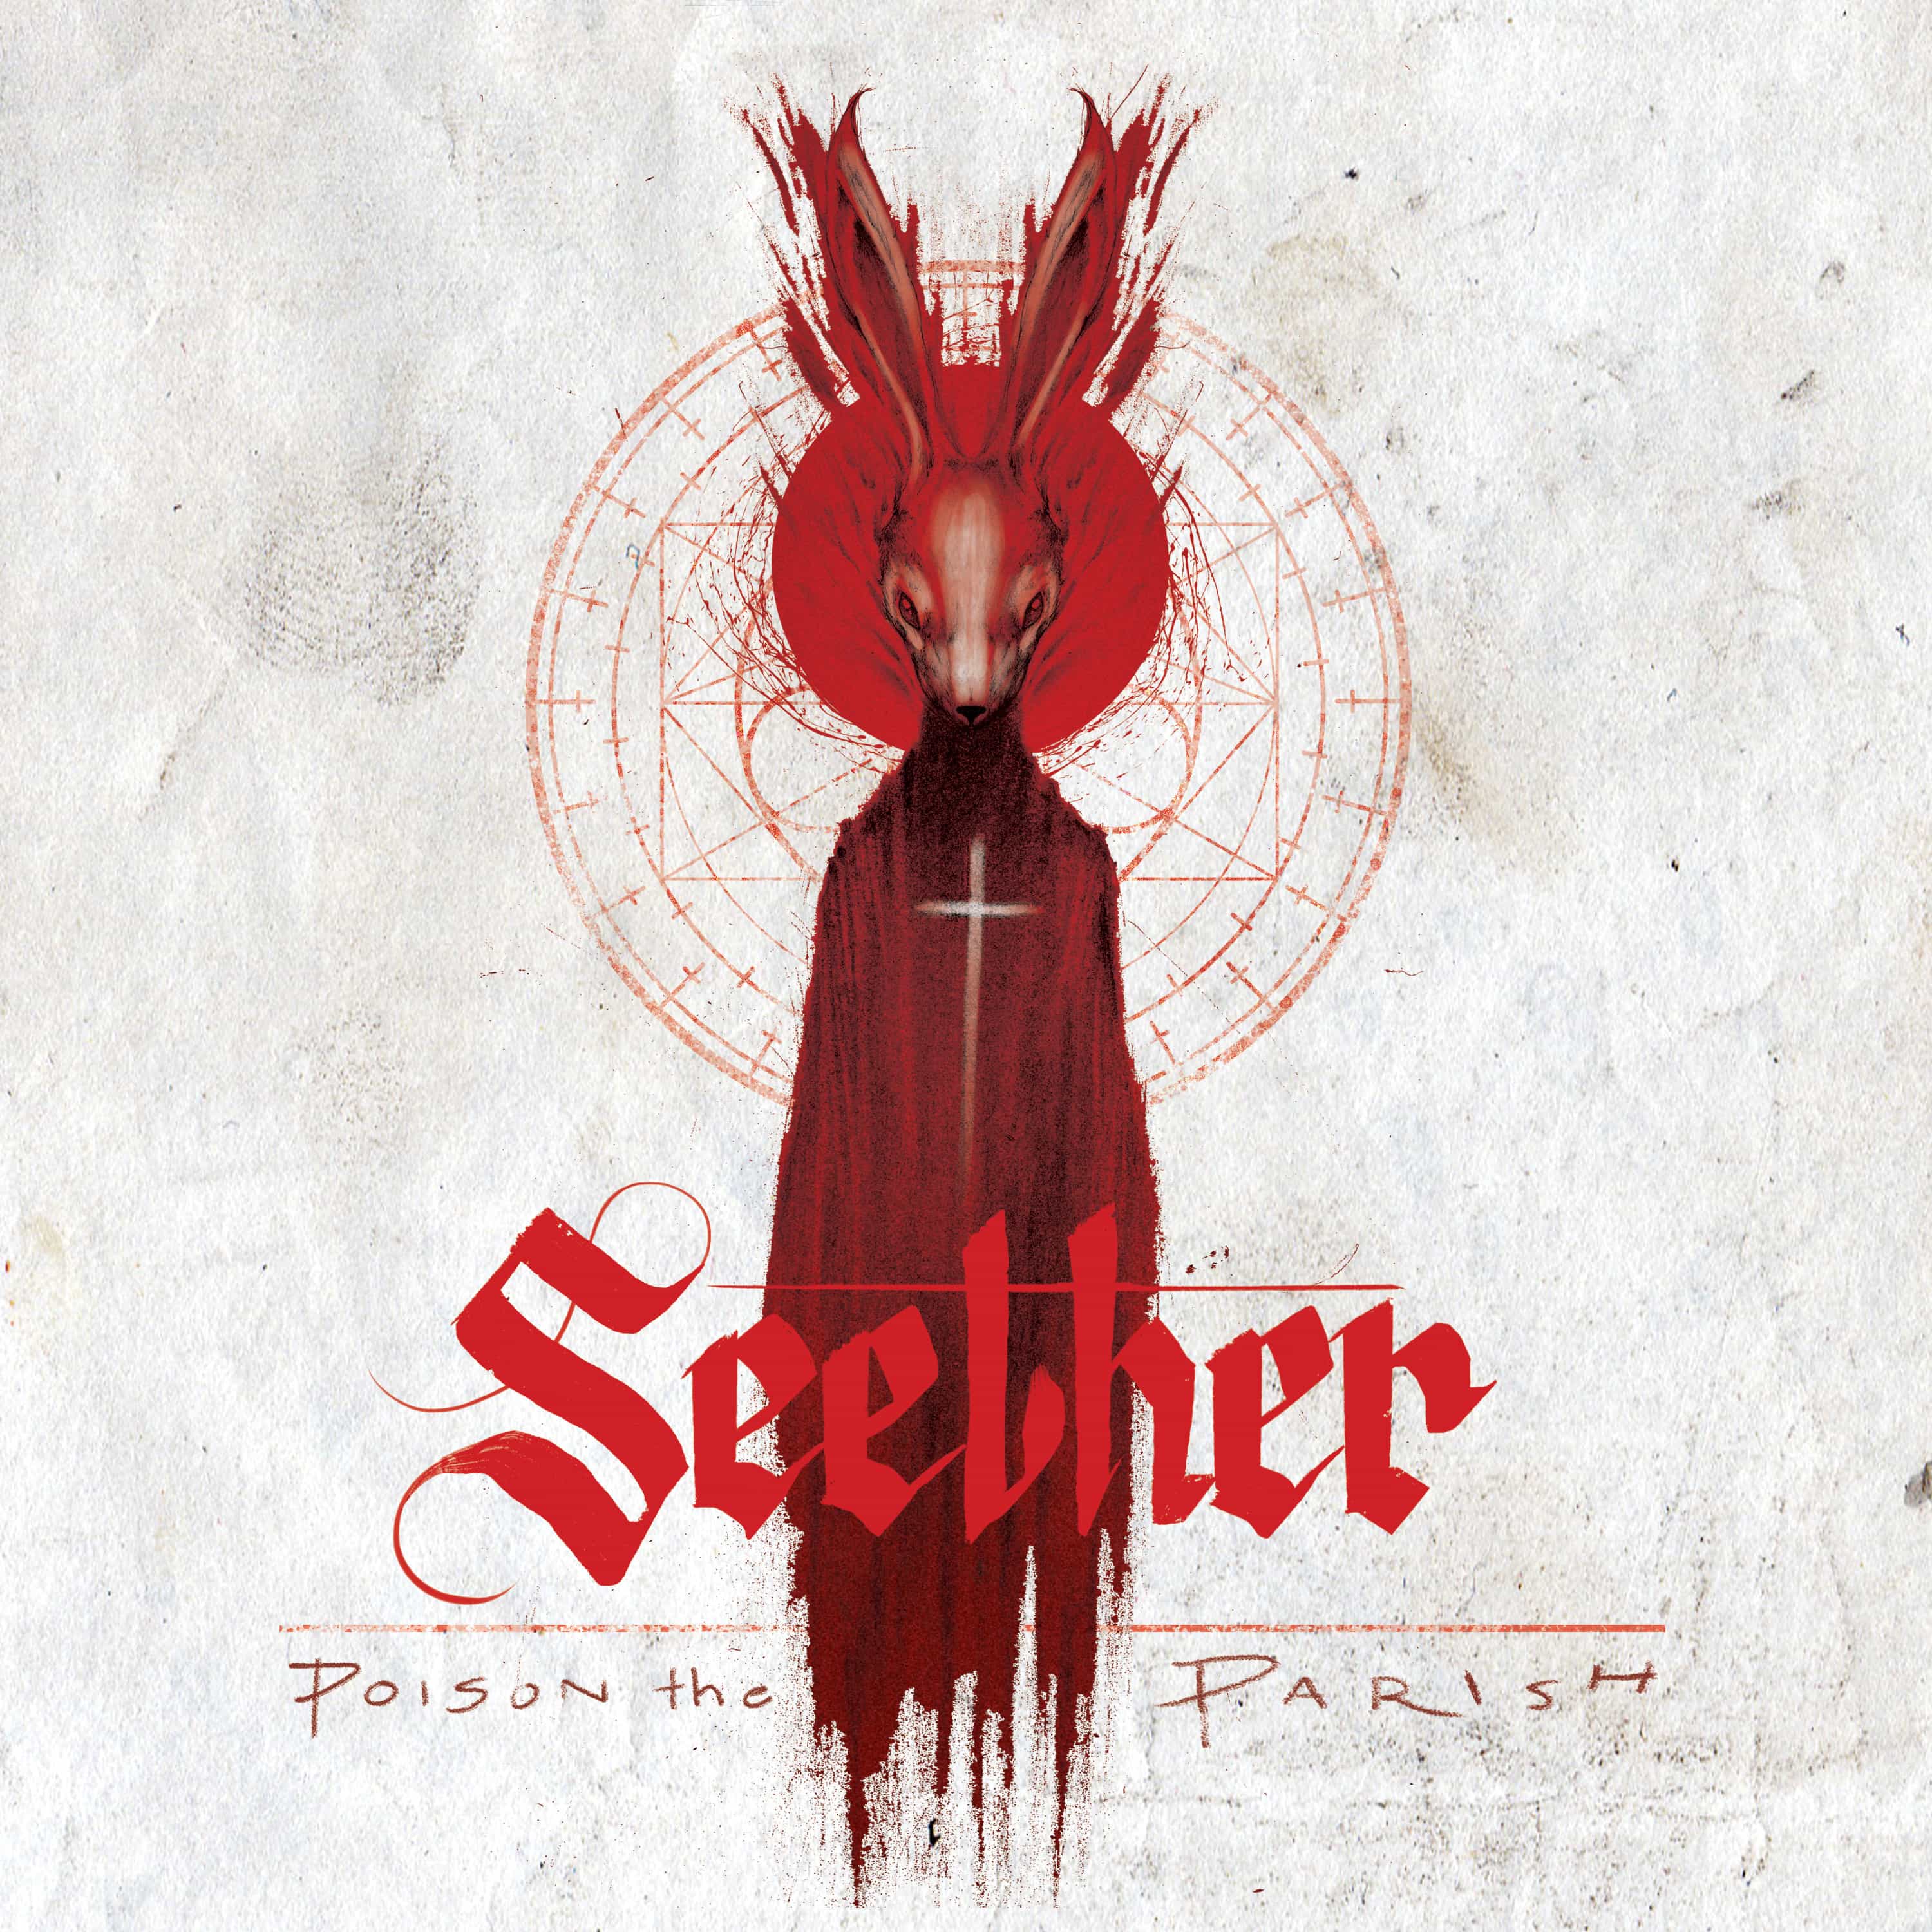 Seether's "Let You Down" Remains #1 For Third Straight Week At Rock Radio